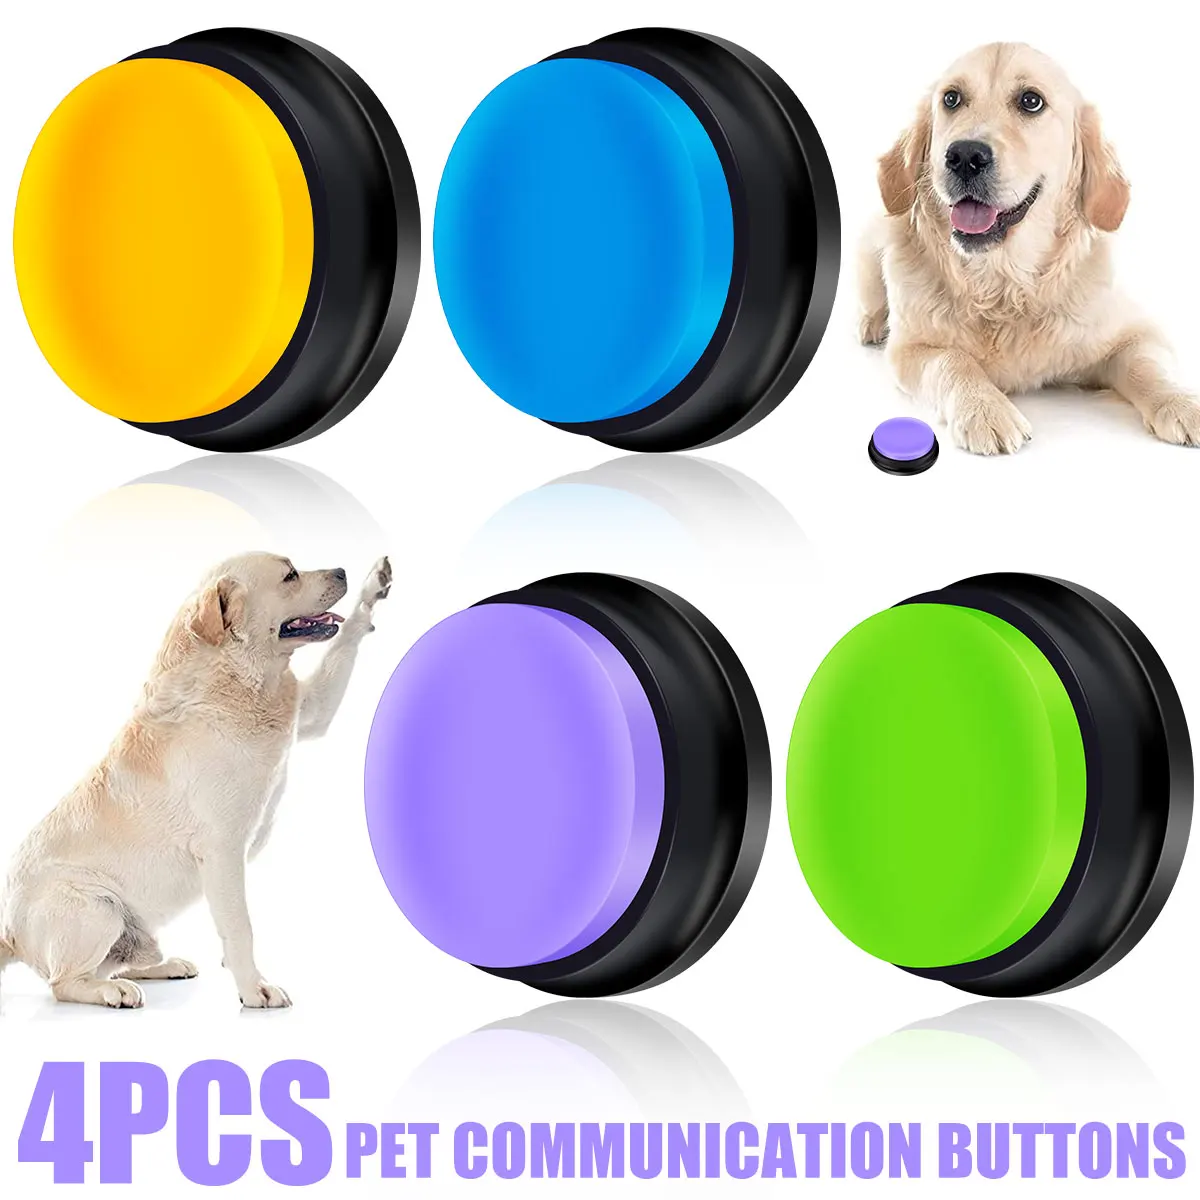 

NEW 4Pcs Dog Button Pet Communication Button Pet Training Buzzer Battery Operated Recordable Small Clear Talking Button Portable